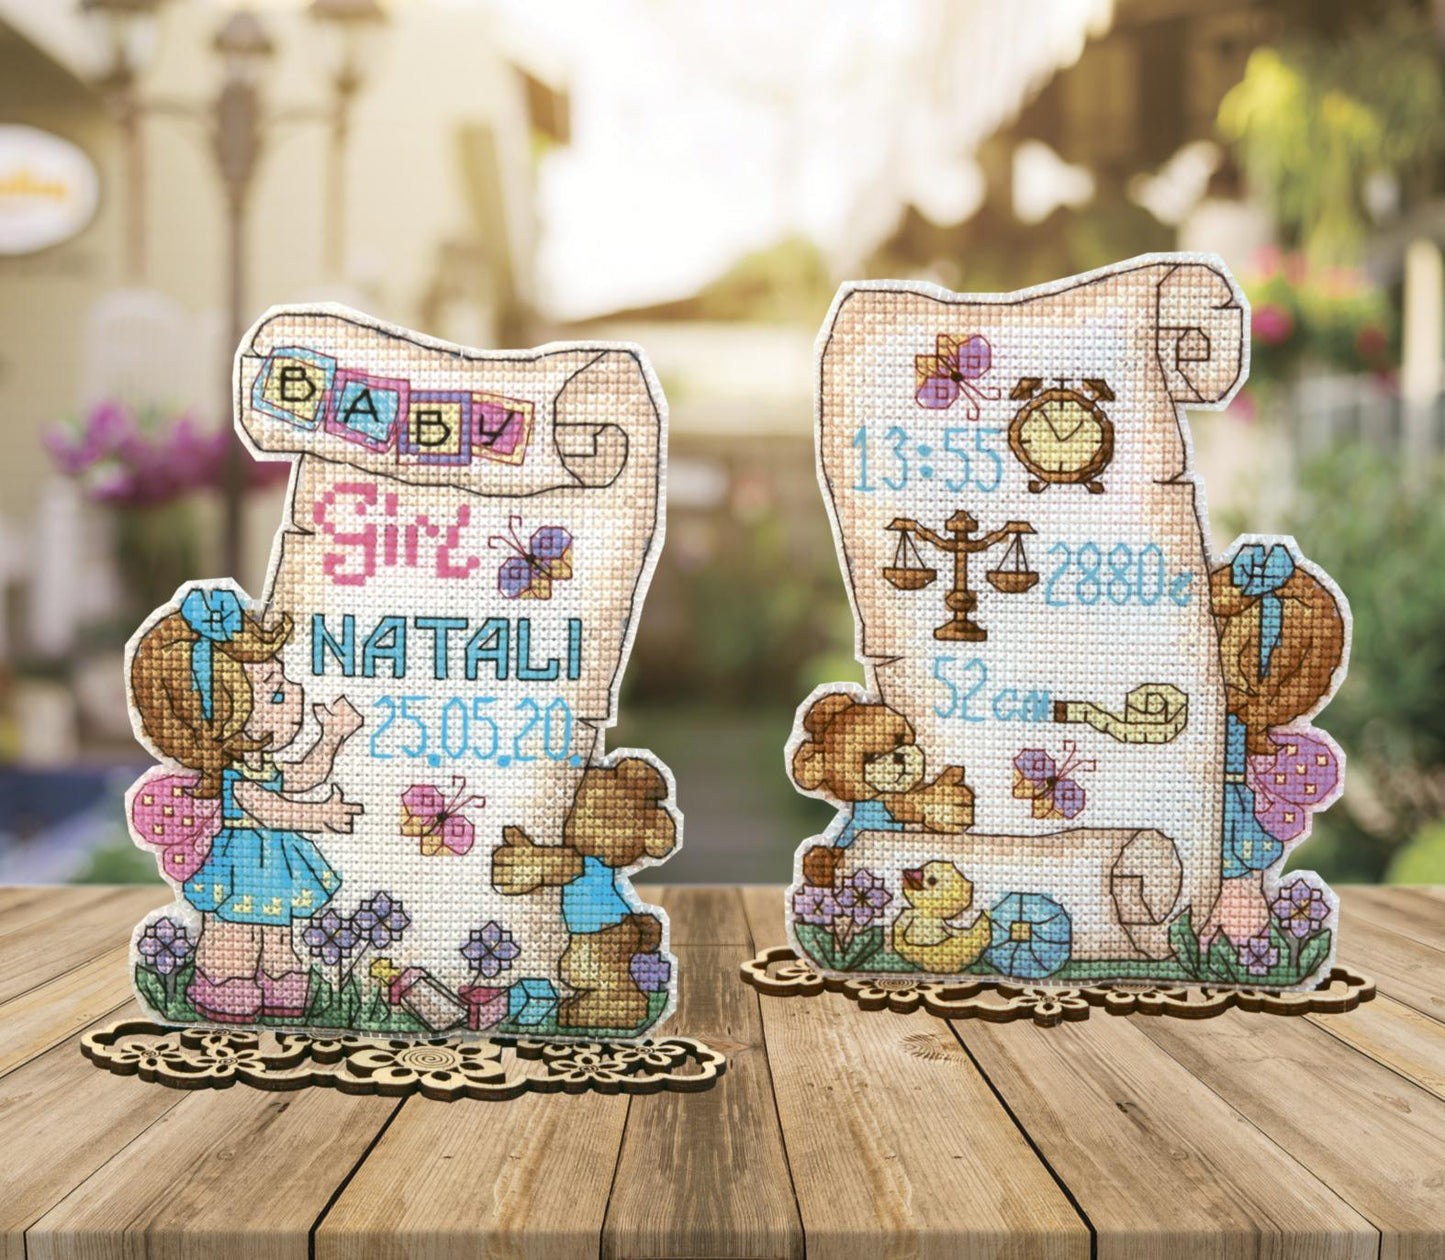 BABYGIRL gift "Joyful events", Counted Cross Stitch Kit, 14 count plastic canvas, size 12 x 13,5 cm, CRYSTAL ART (T-71)